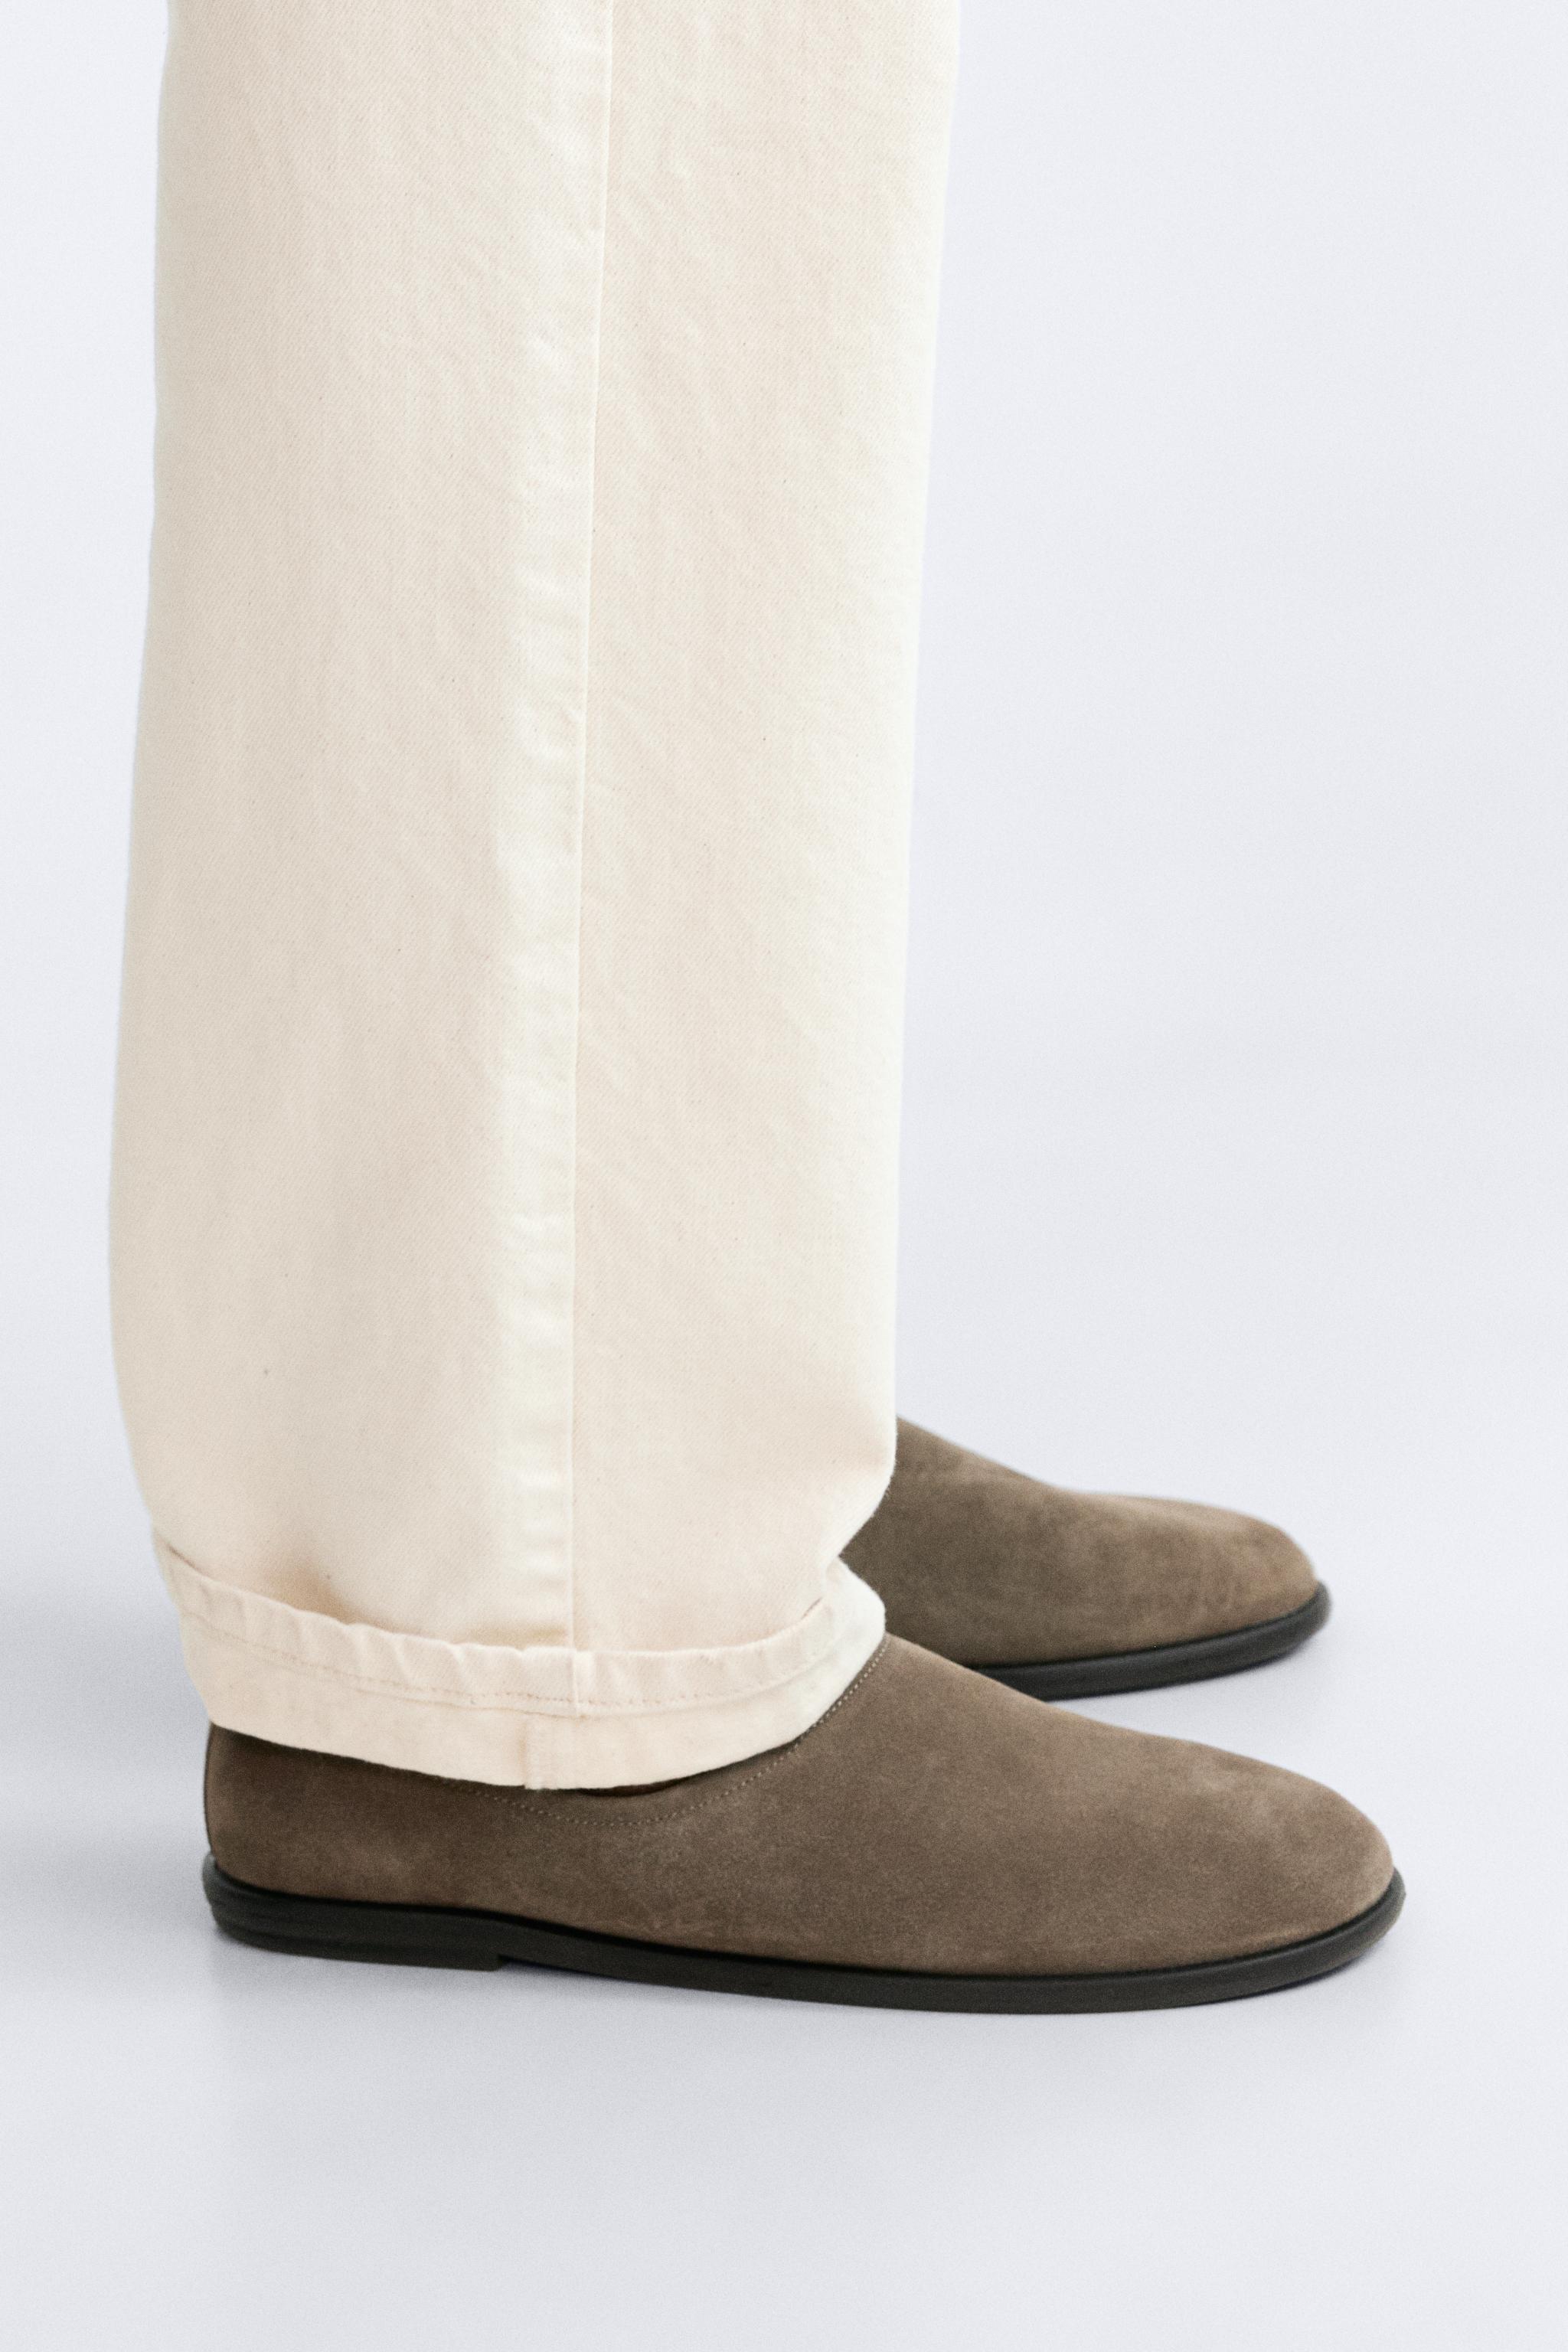 SOFT SPLIT LEATHER LOAFERS - Taupe Gray | ZARA United States